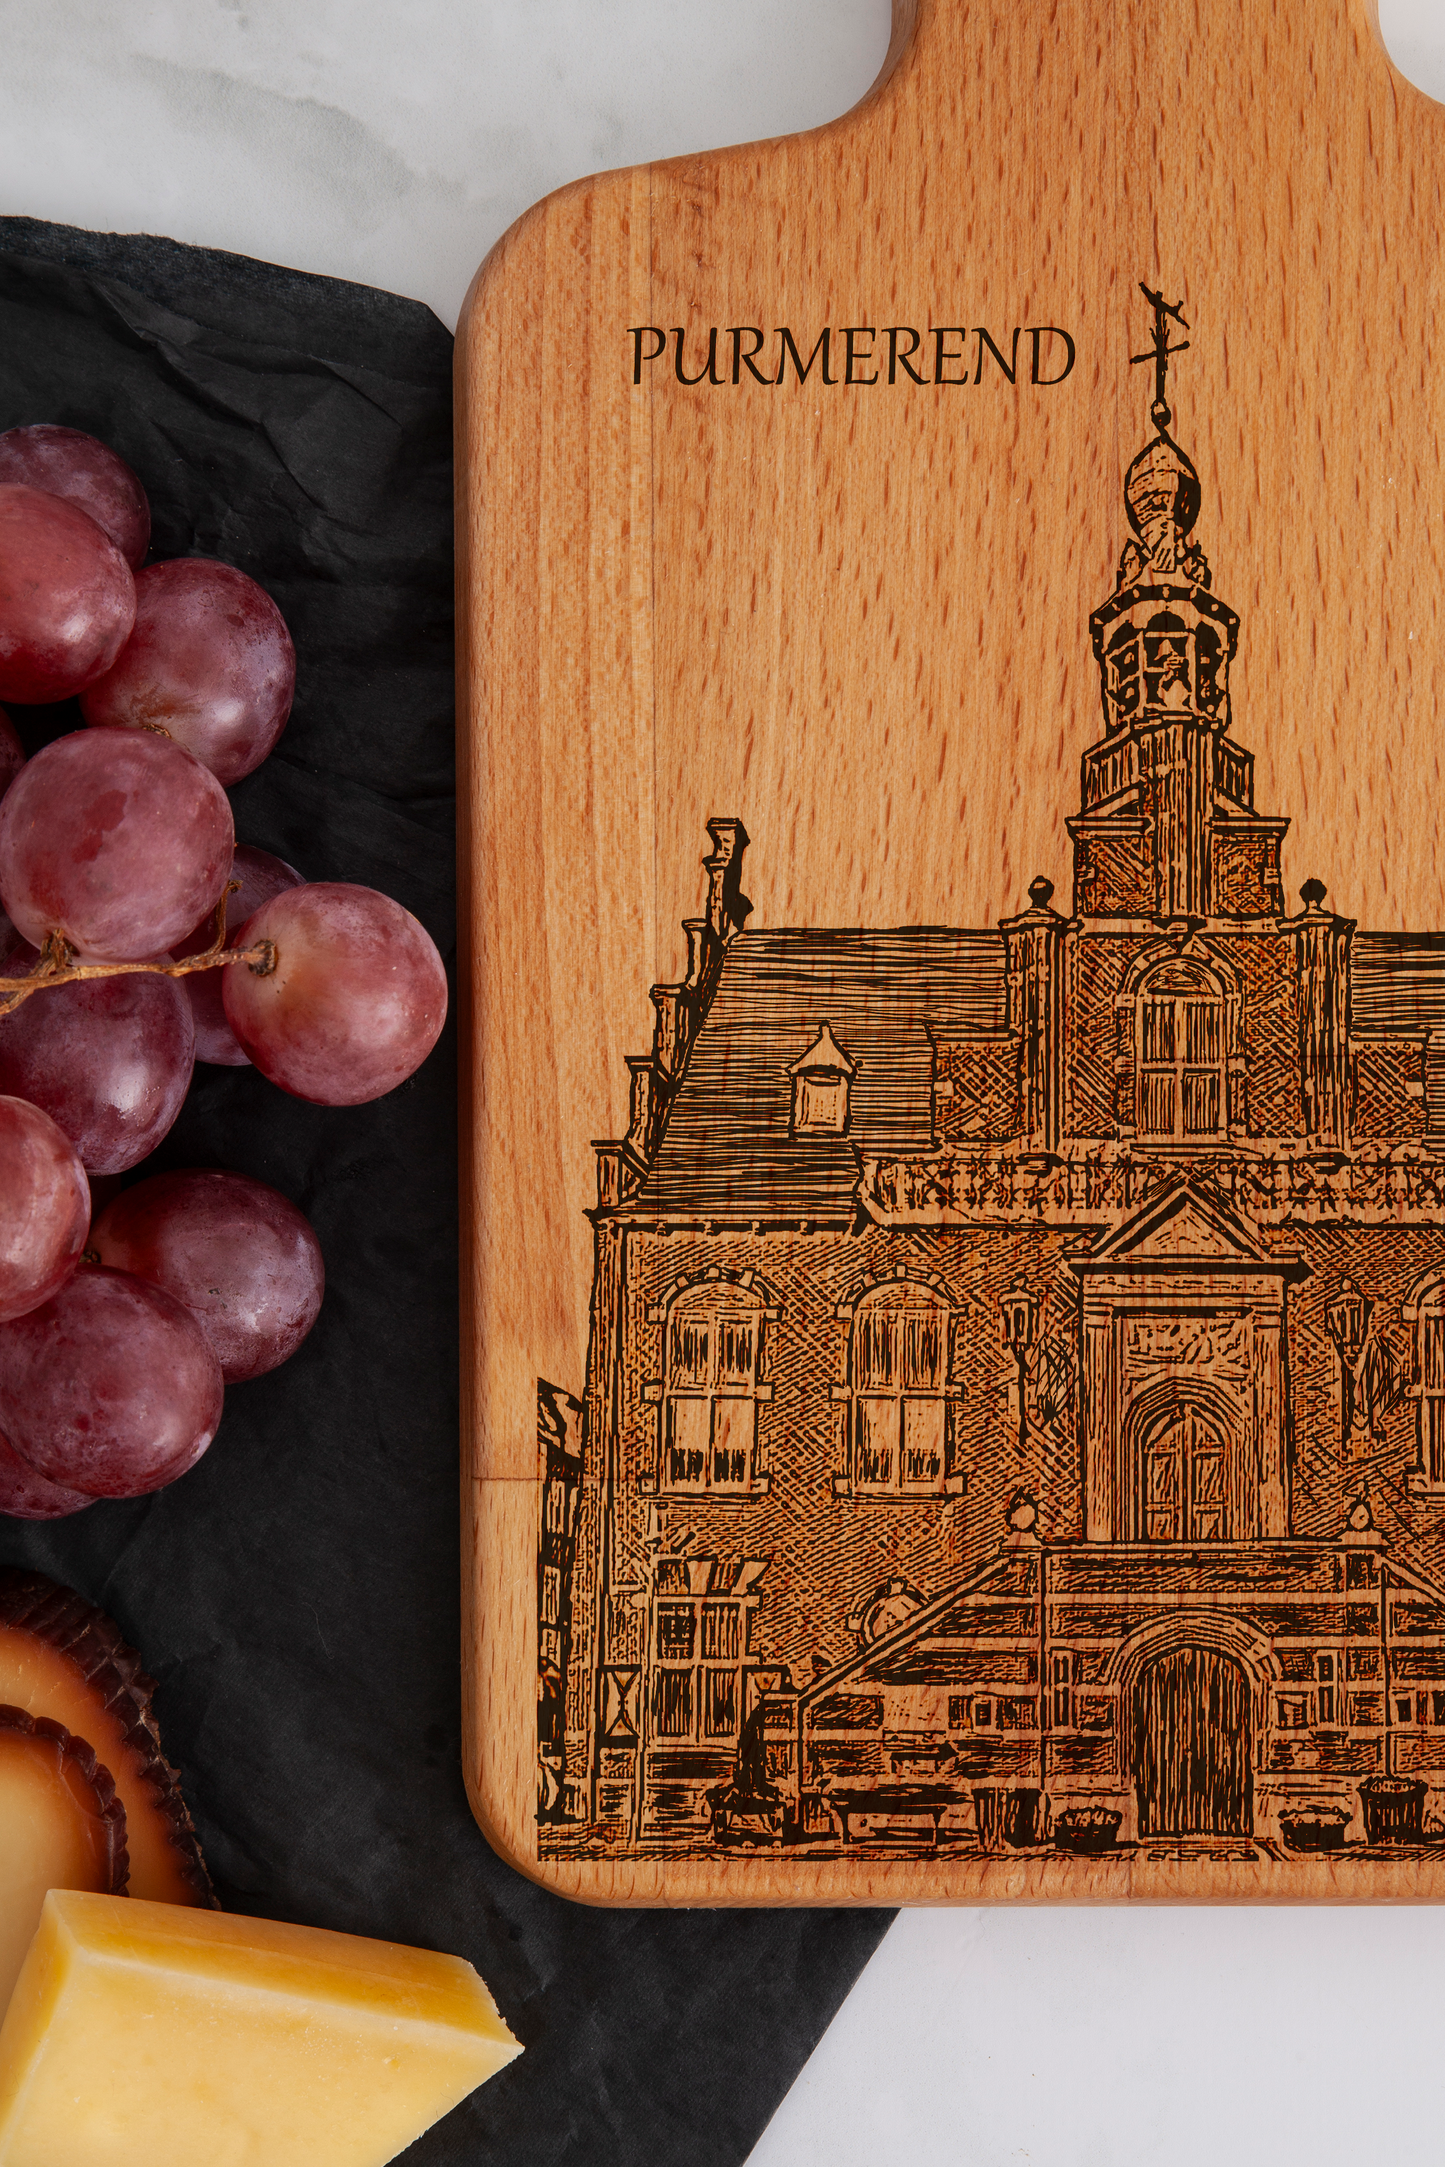 Purmerend, Stadhuis, cheese board, close-up